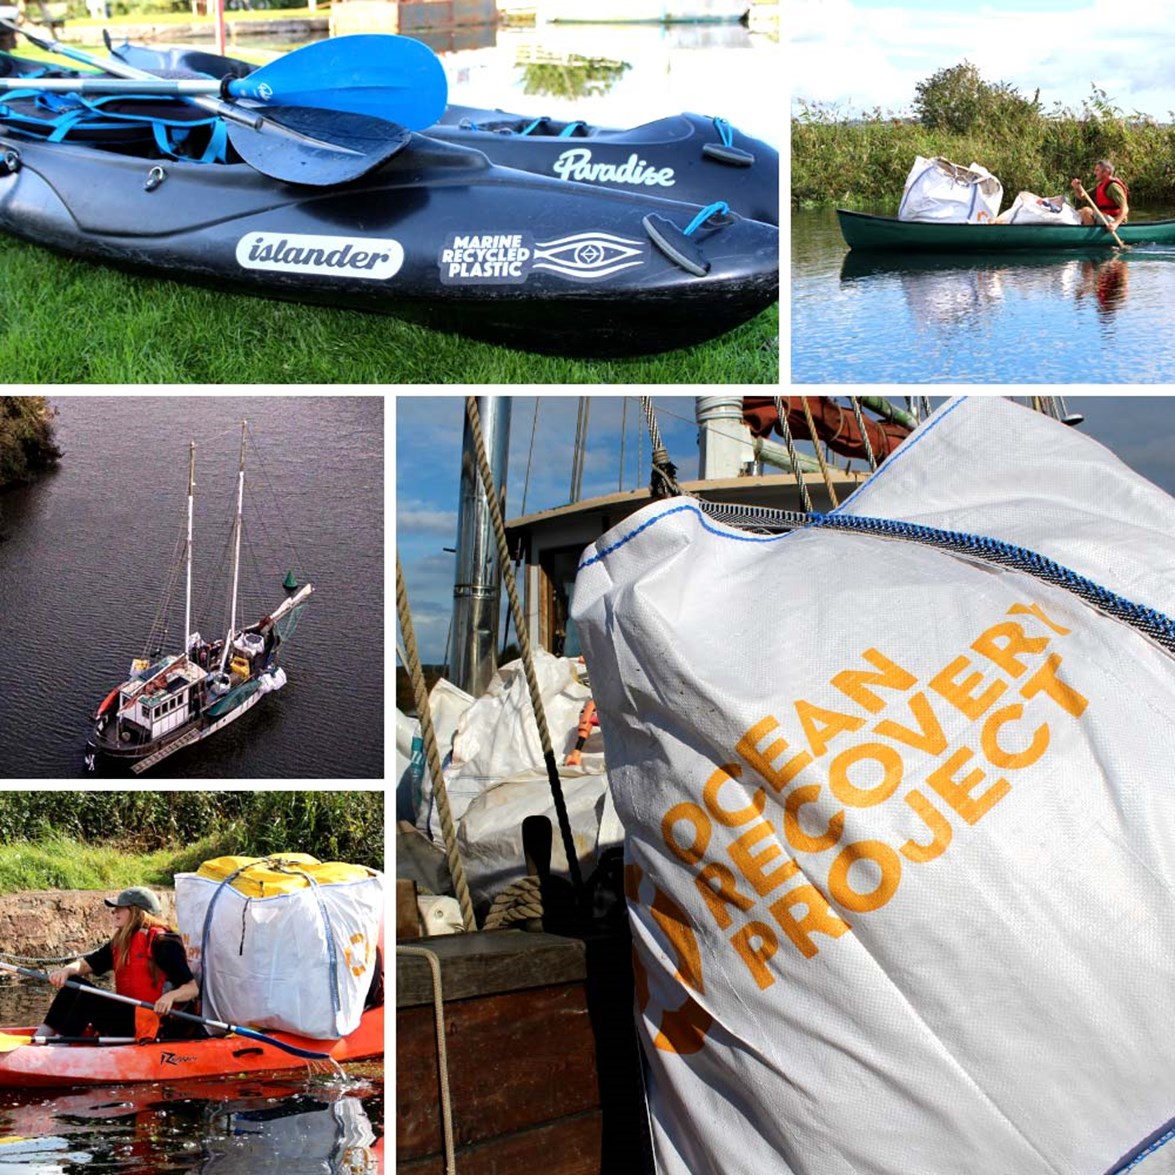 Plastics collected from beaches being paddled into Exeter